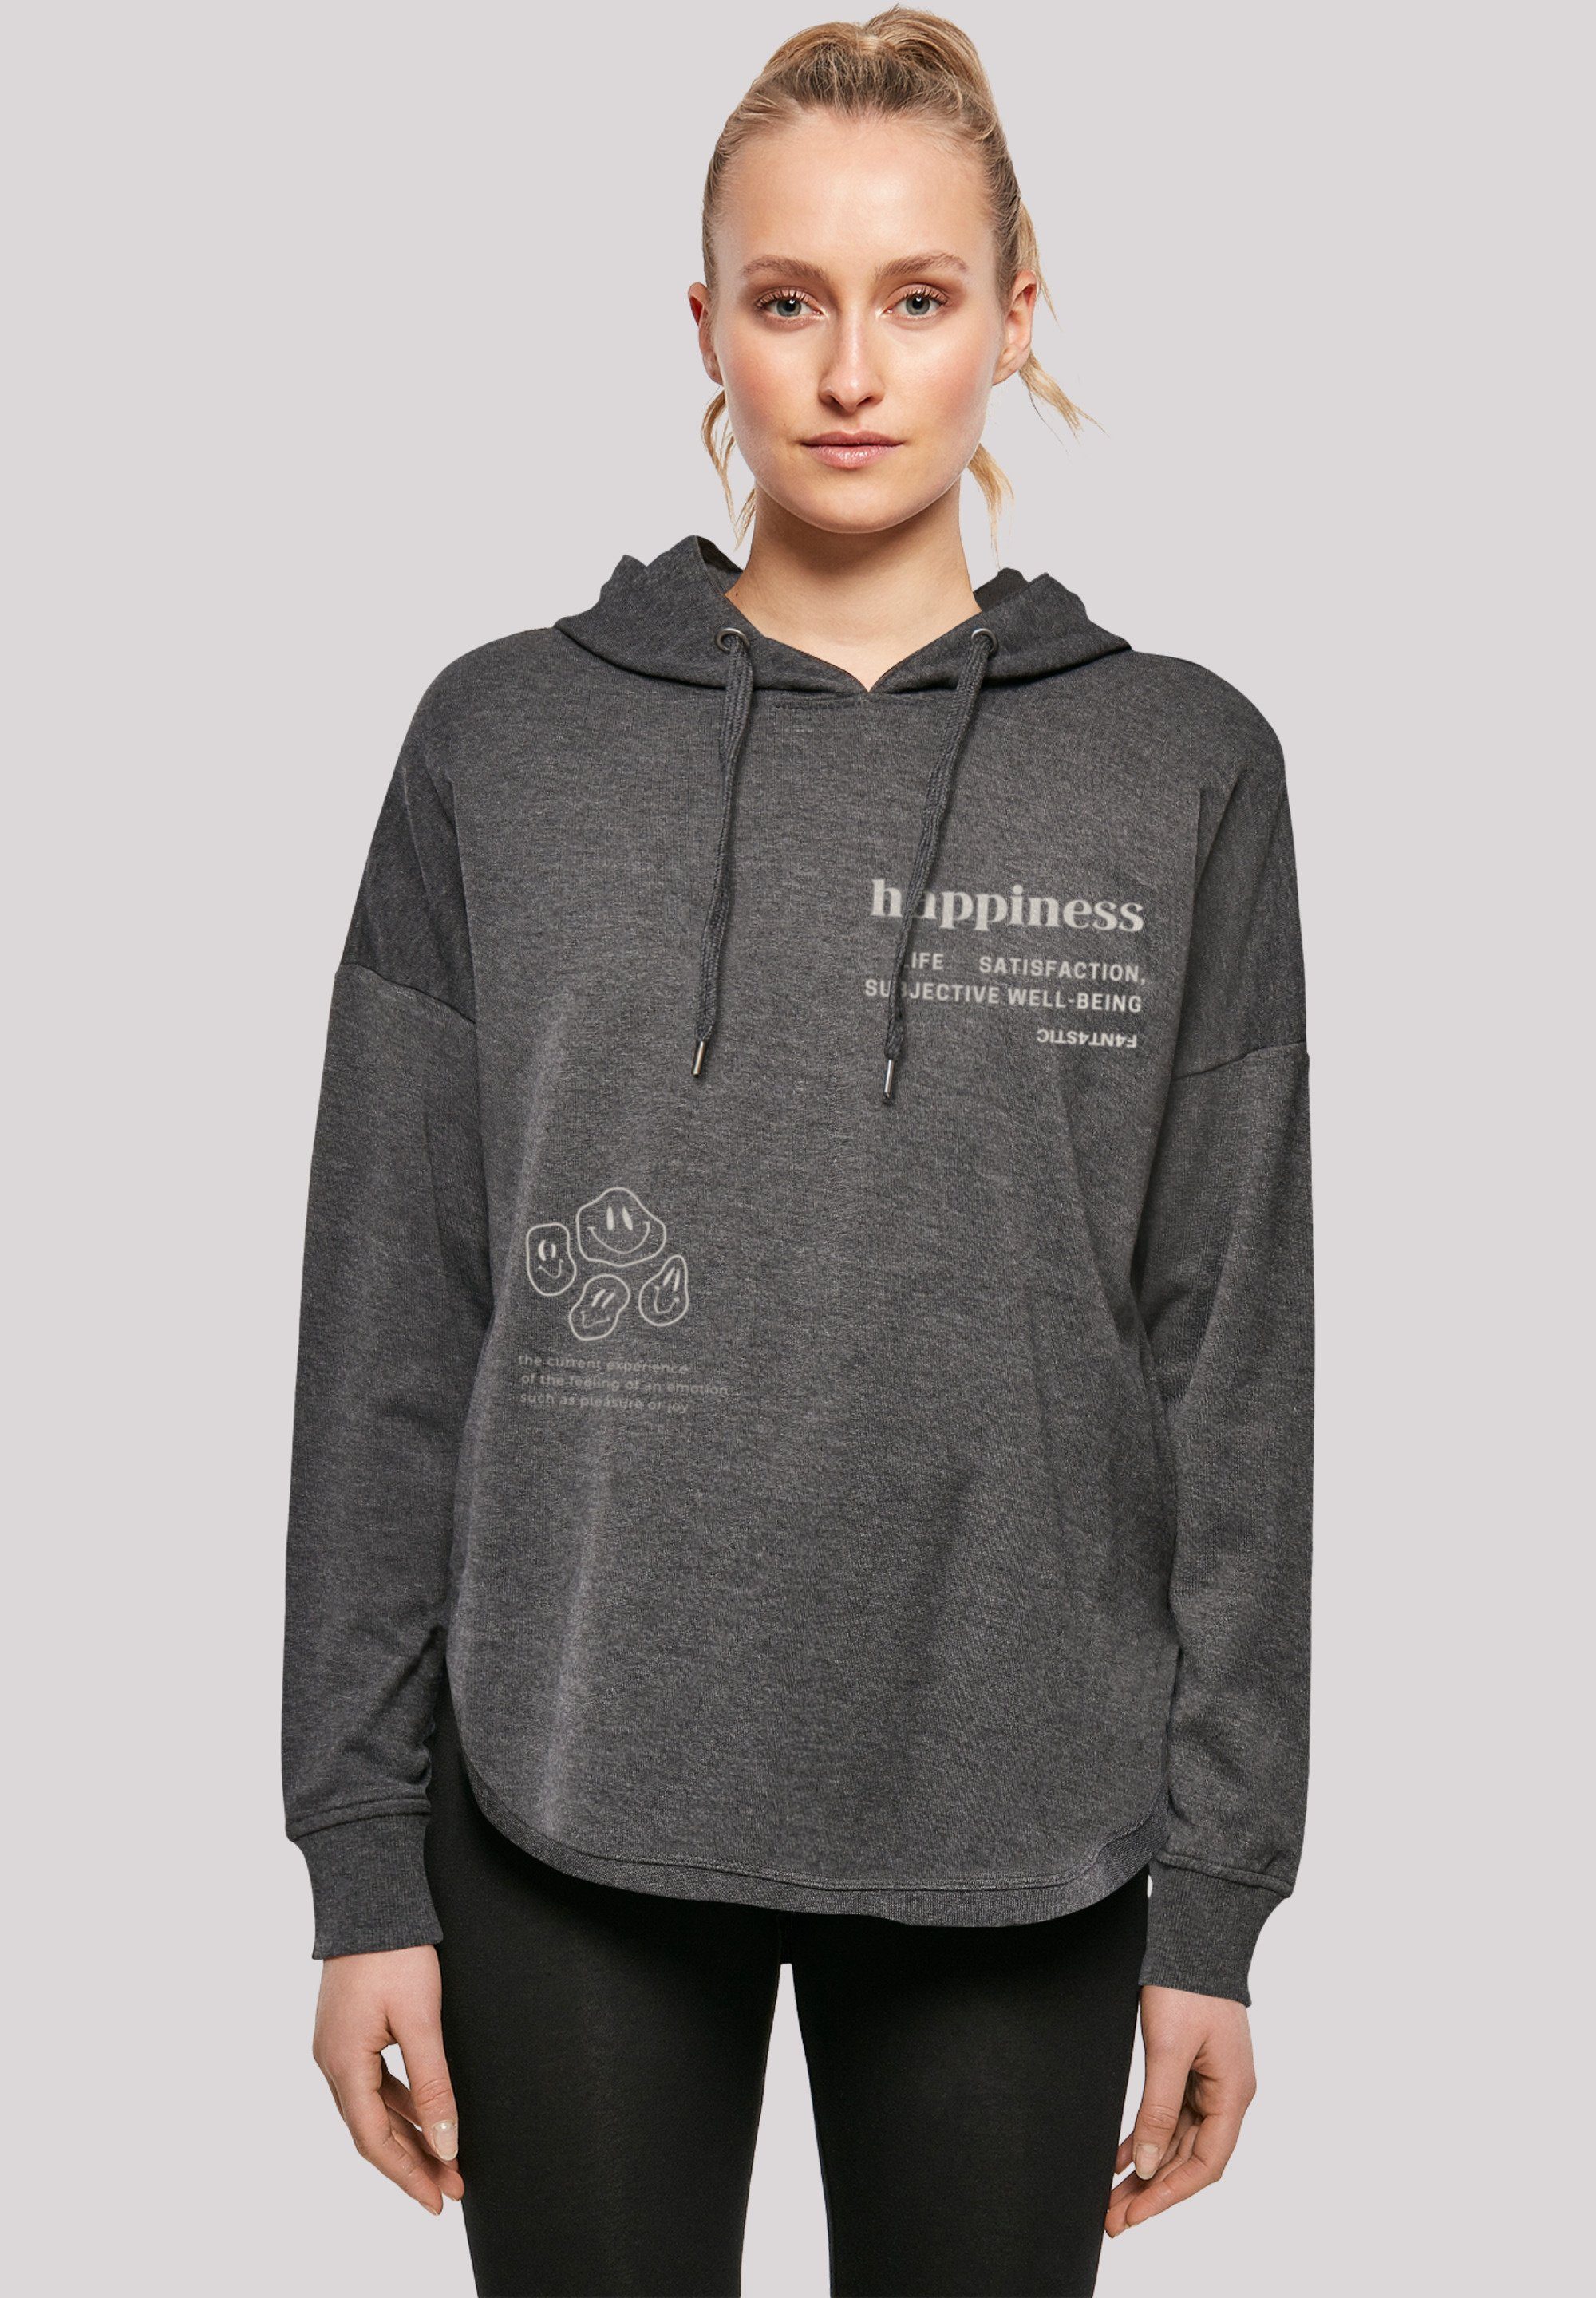 happiness HOODIE OVERSIZE charcoal F4NT4STIC Kapuzenpullover Print